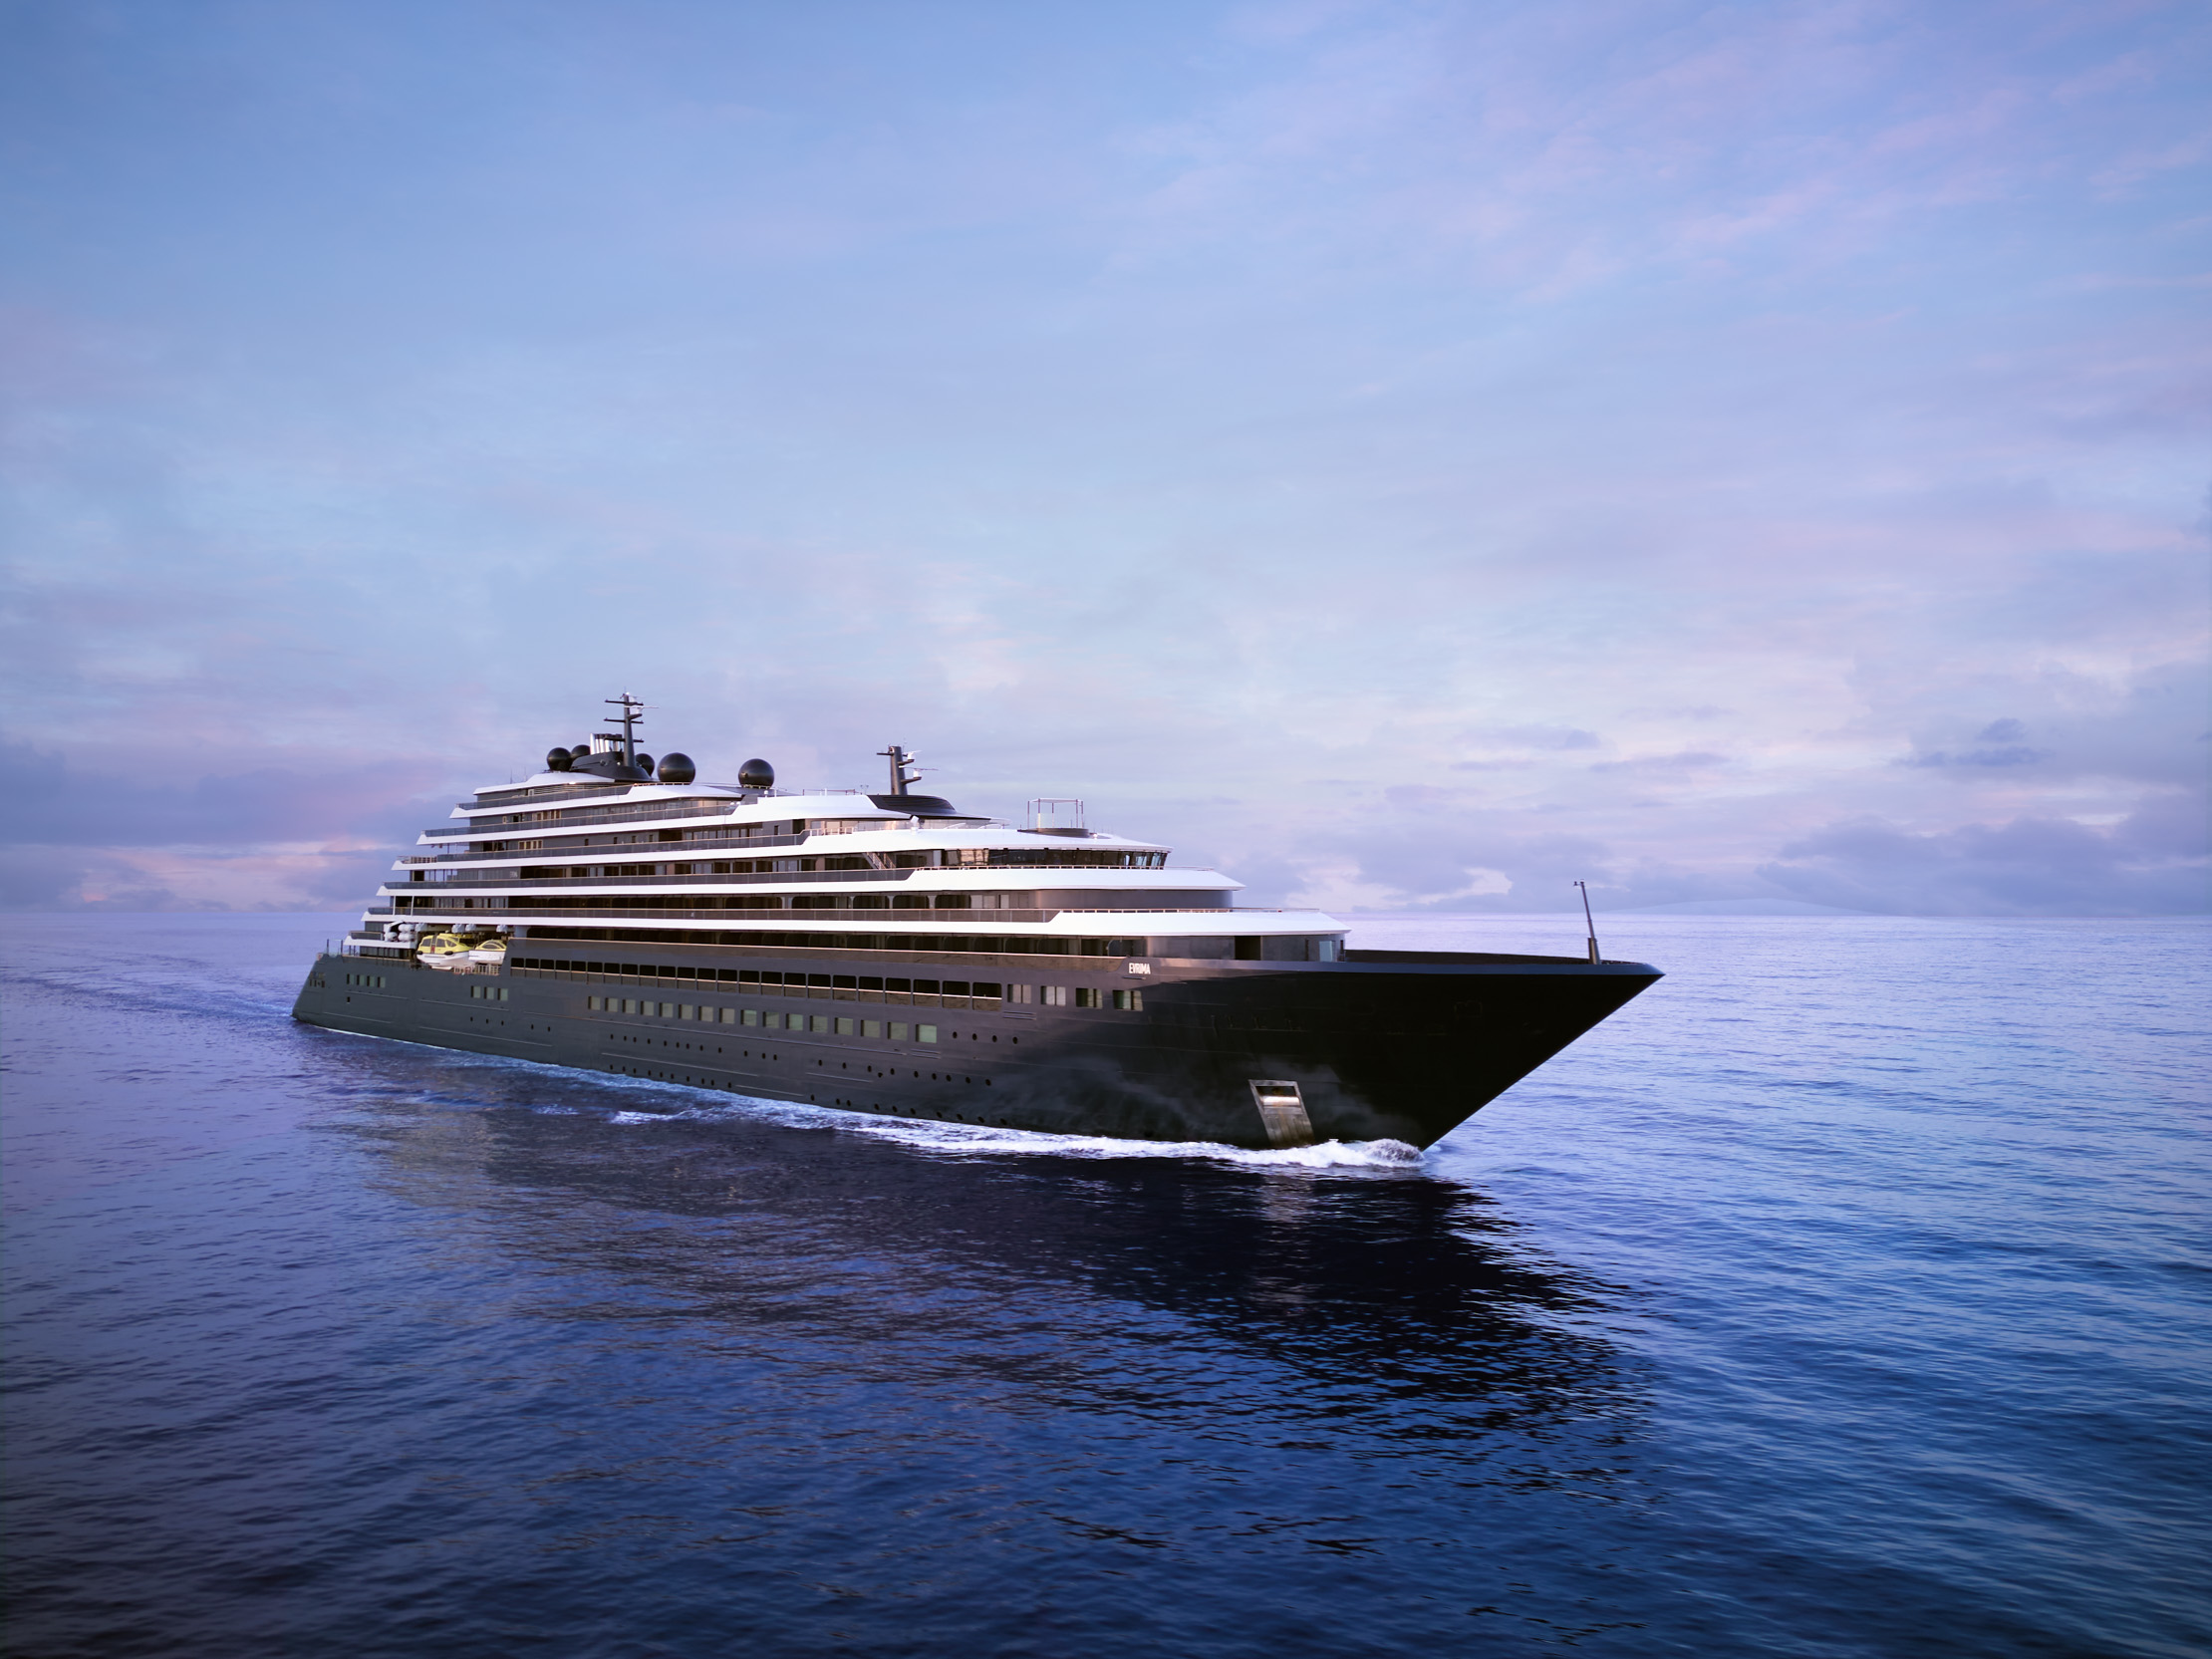 The 298-passenger Evrima aspires to bring Ritz-Carlton hotel comfort and service to sea.